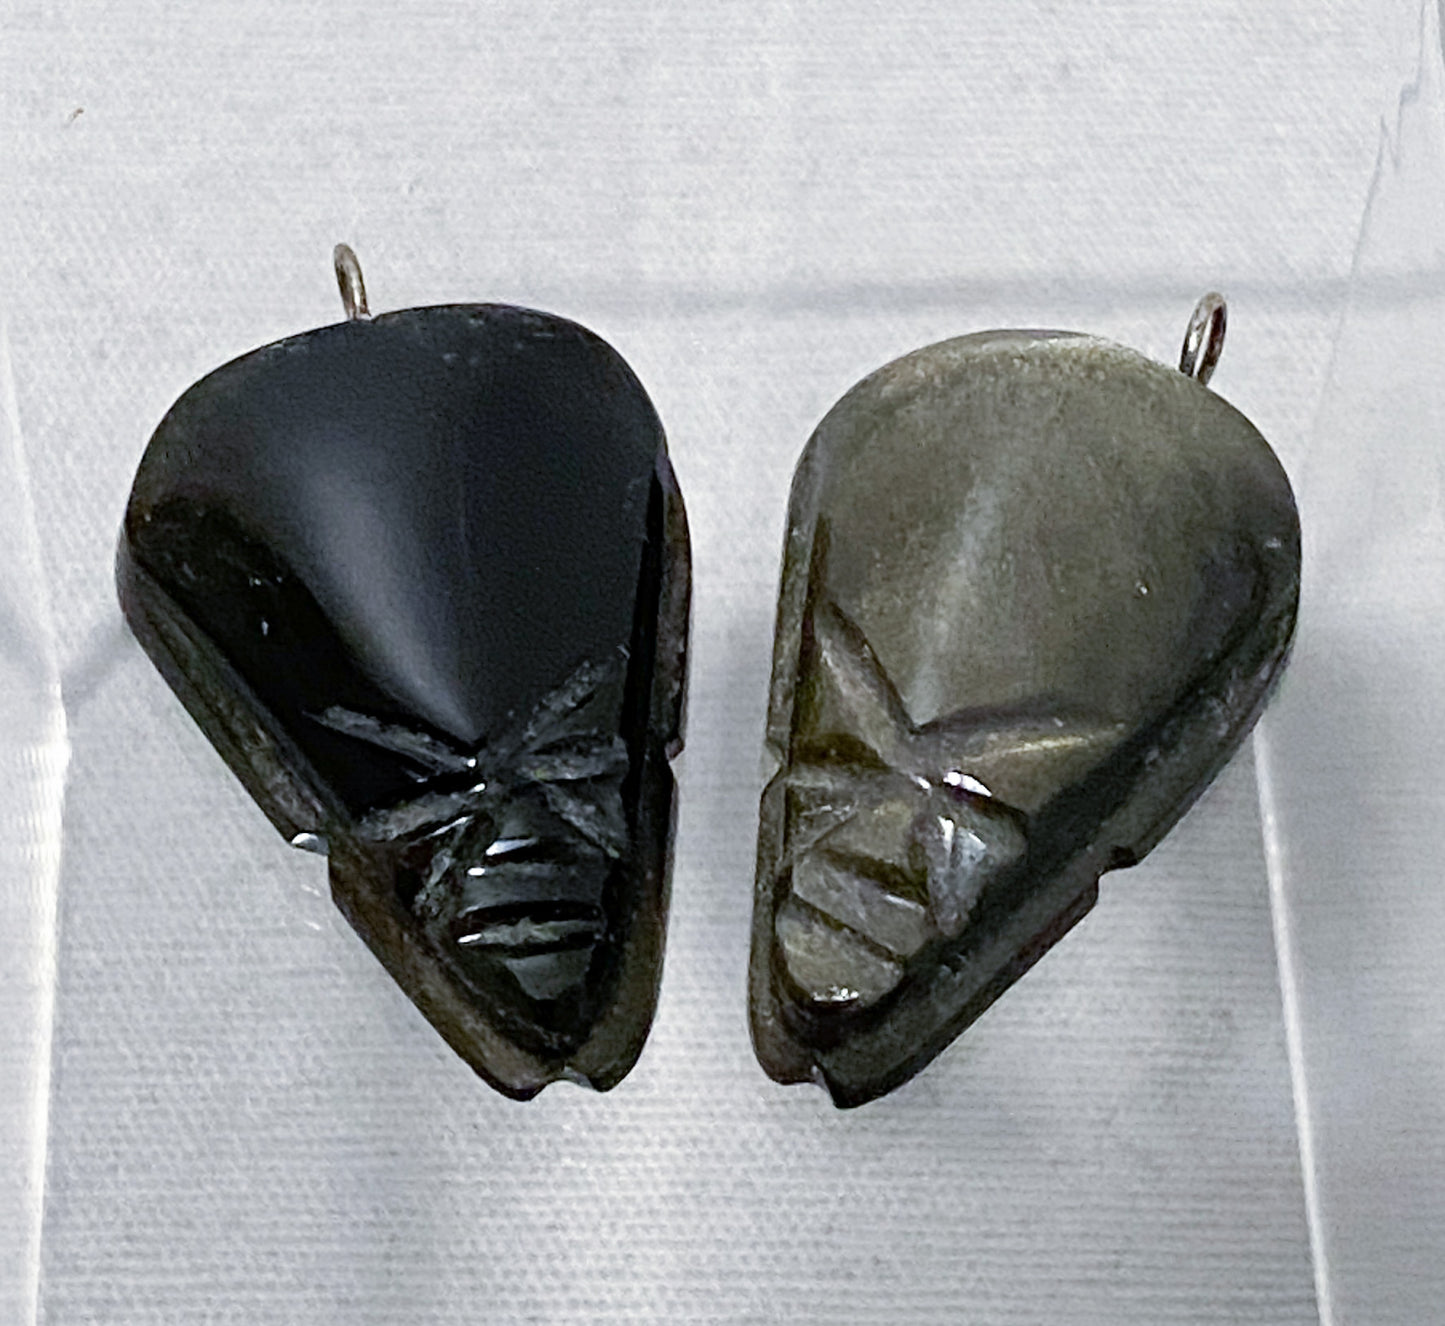 Hand crafted Black Gold sheen Obsidian Charms/Pendants (set of 8)